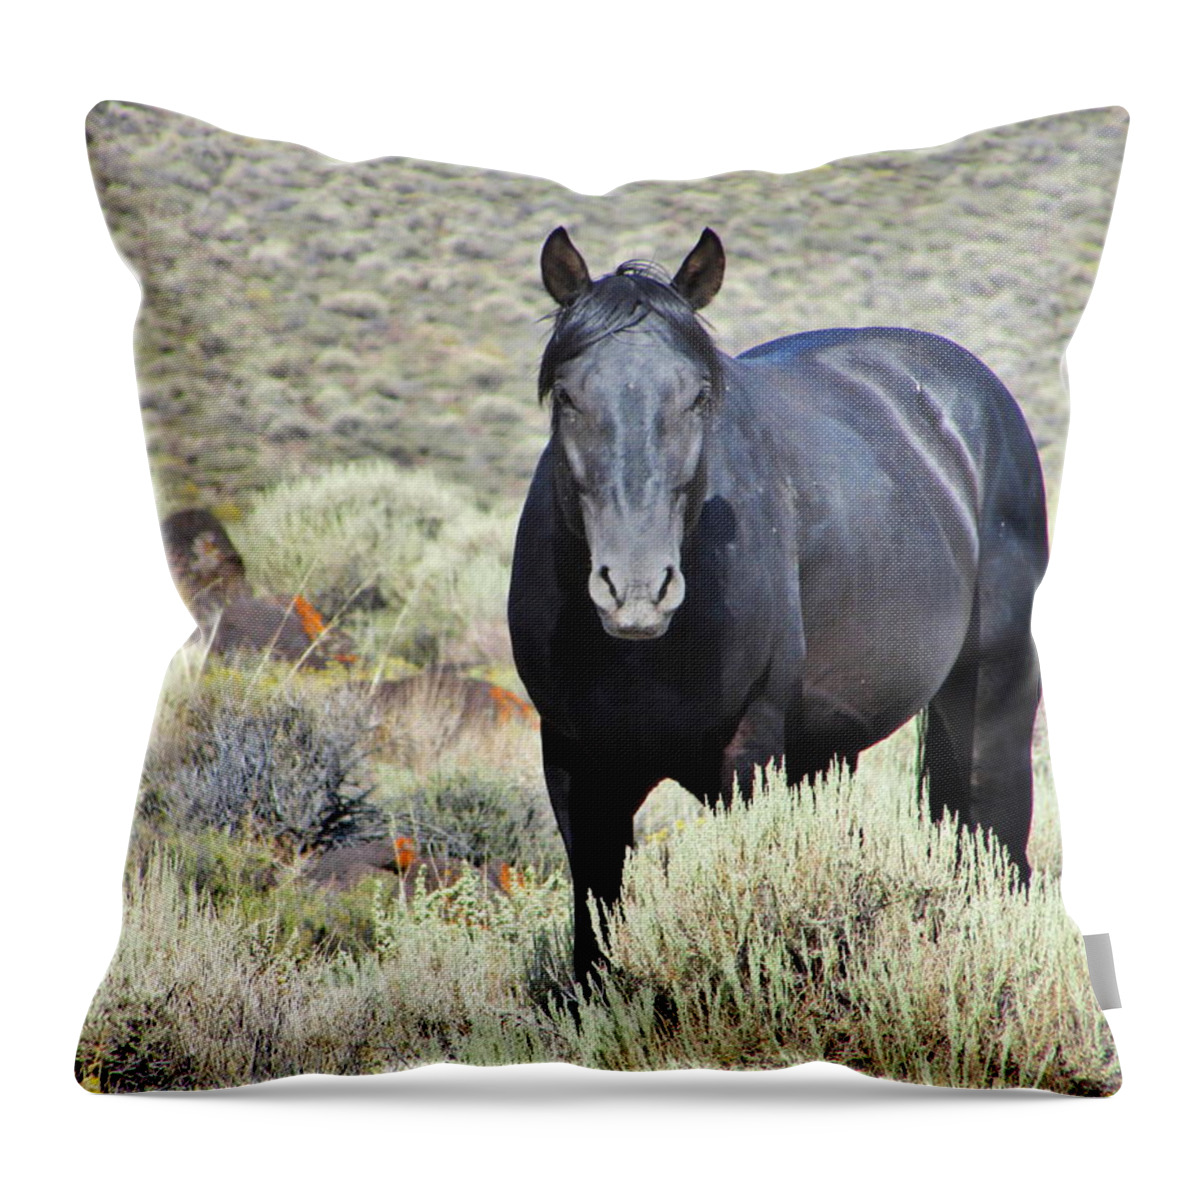 Horse Throw Pillow featuring the photograph Black Mustang #1 by Marilyn Diaz